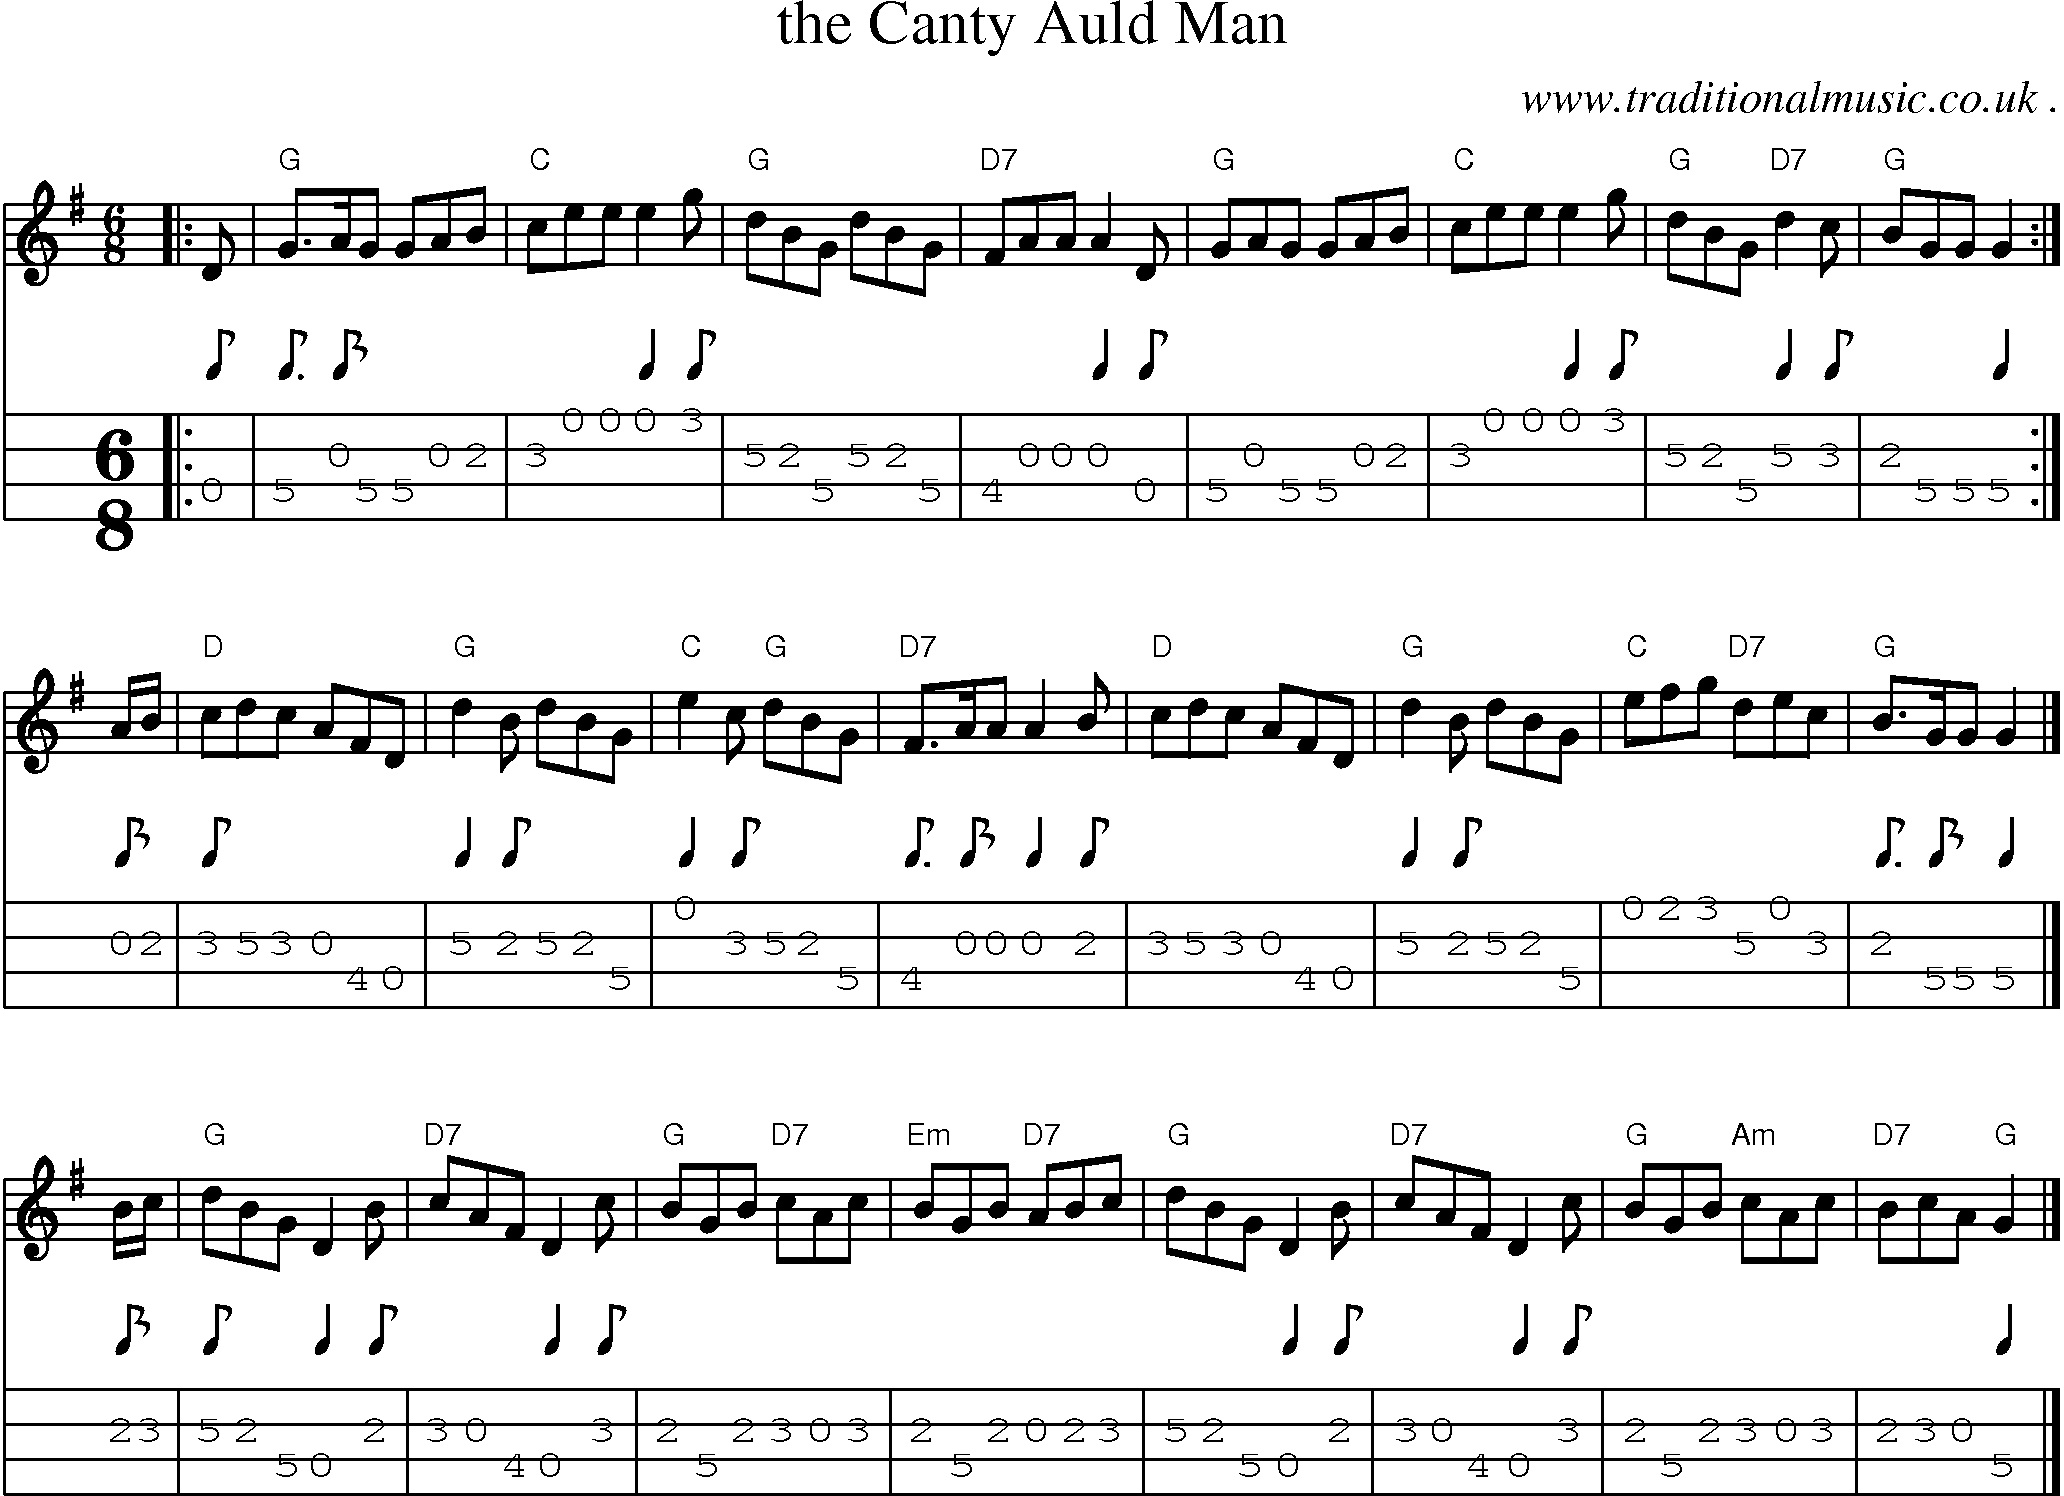 Sheet-music  score, Chords and Mandolin Tabs for The Canty Auld Man